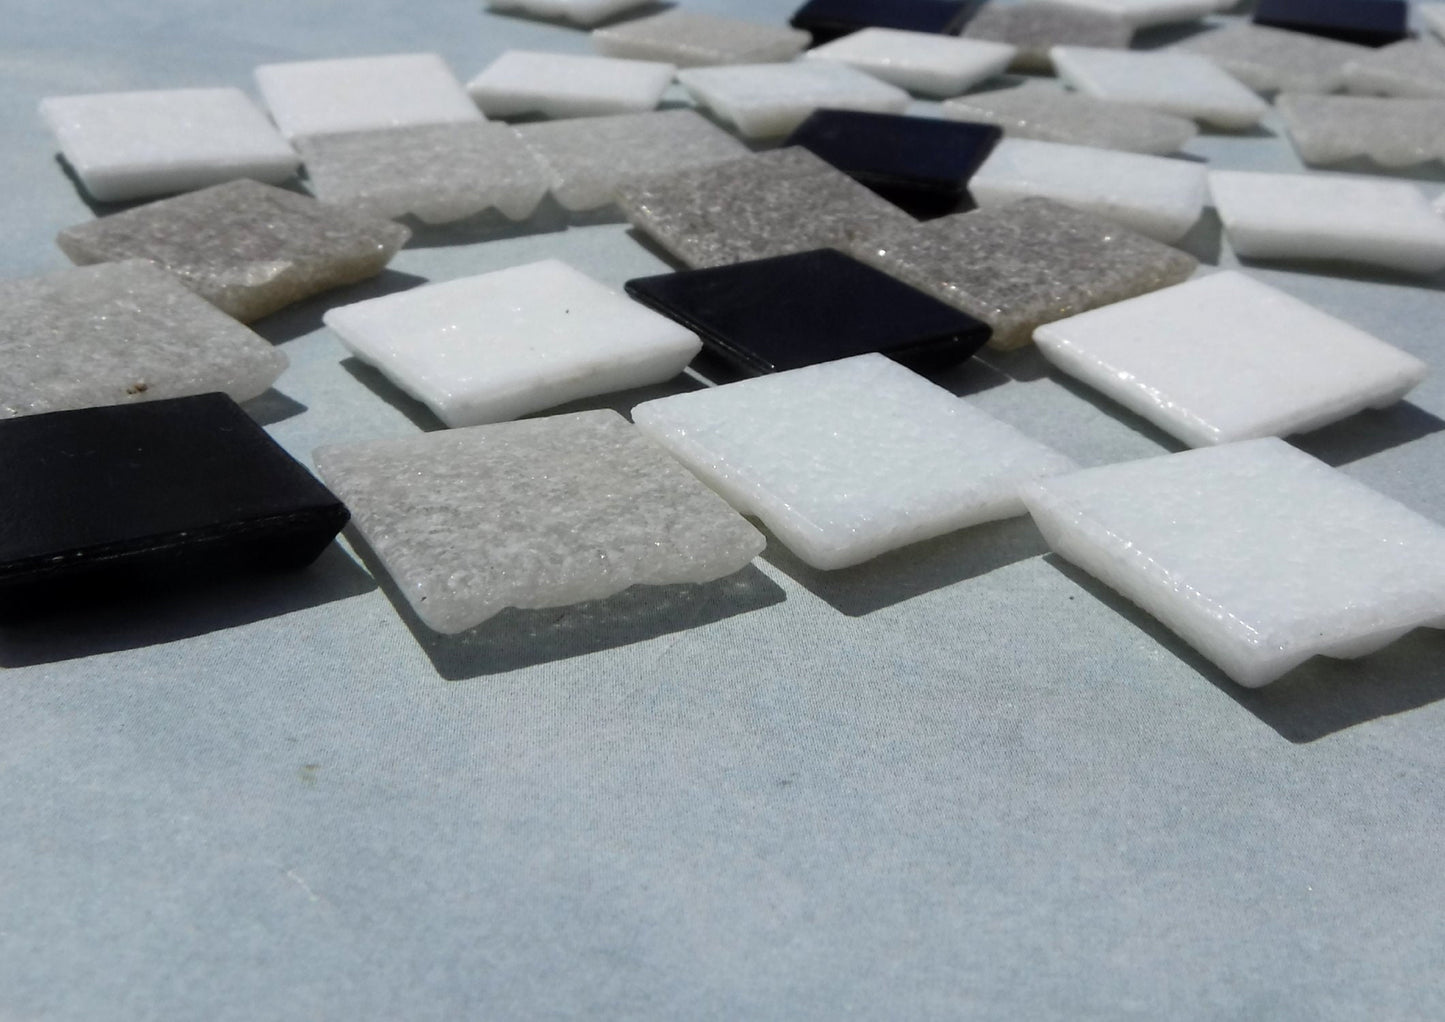 Monochrome Mix Glass Mosaic Tiles Squares - 20mm - Half Pound of Vitreous Glass Tiles in a Mix of White Black and Grays